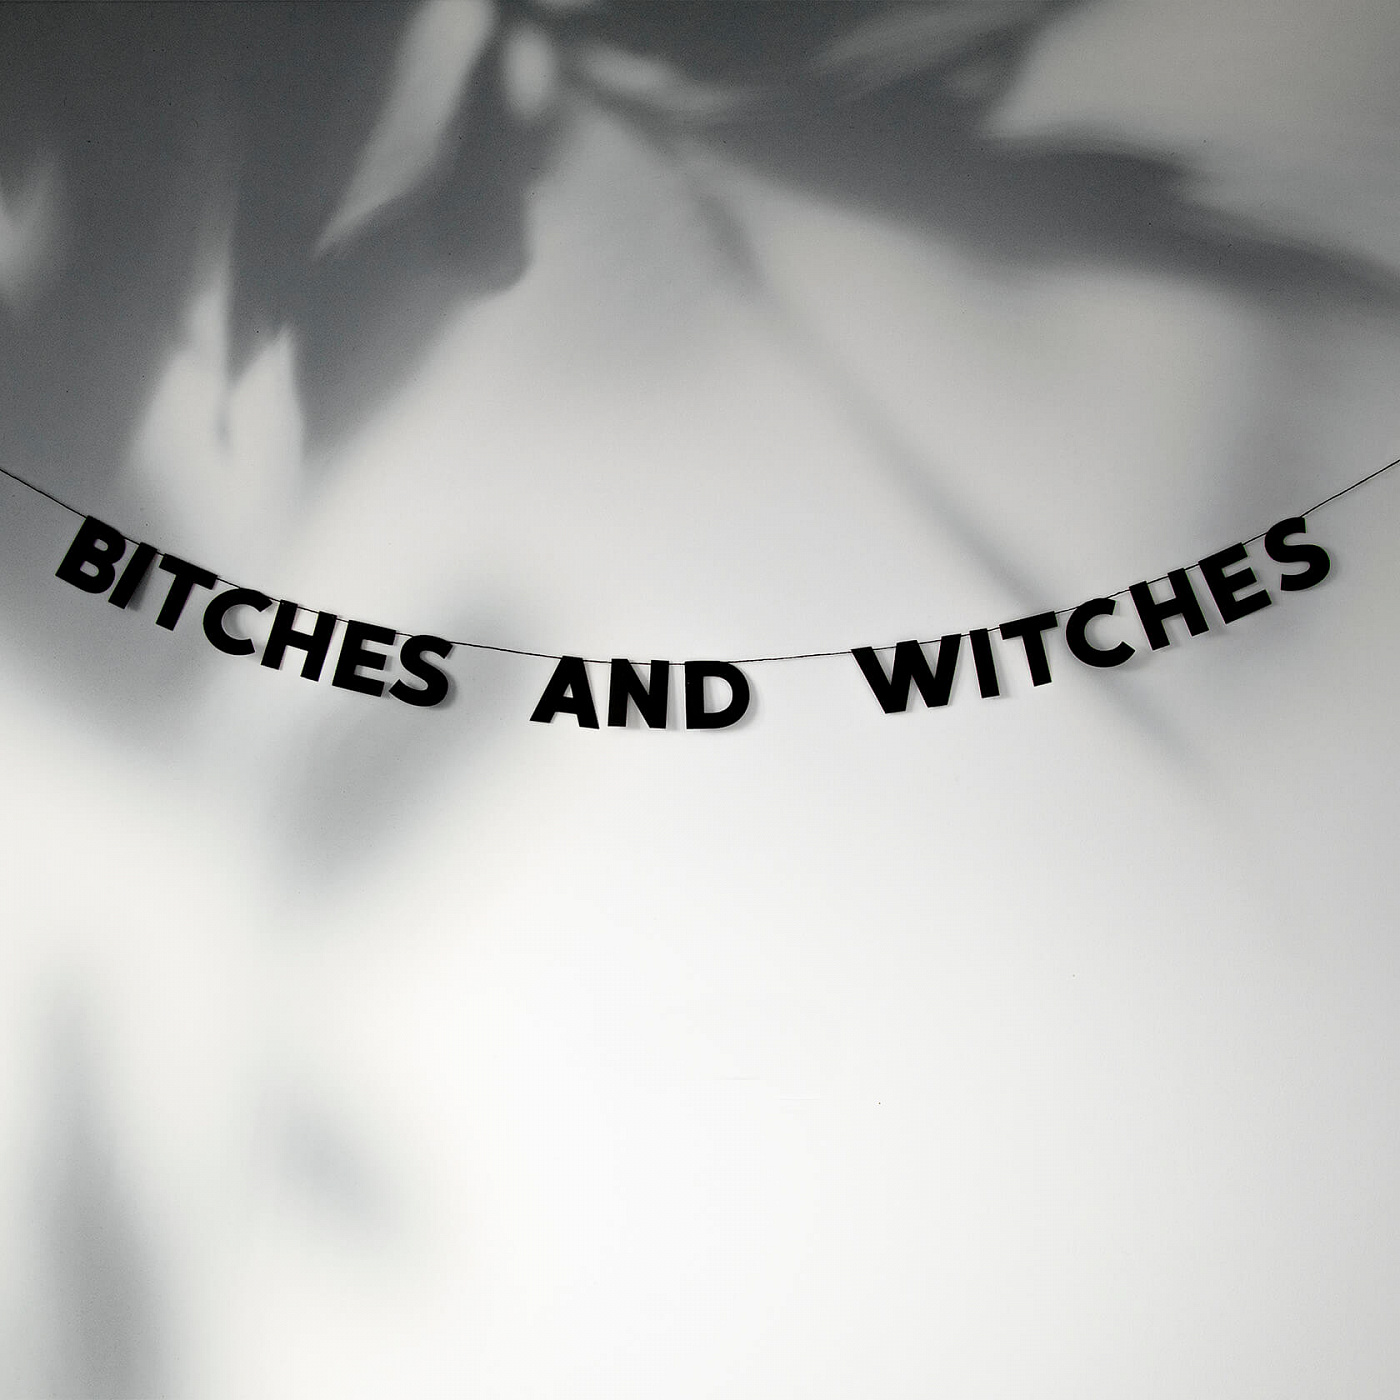  BITCHES AND WITCHES